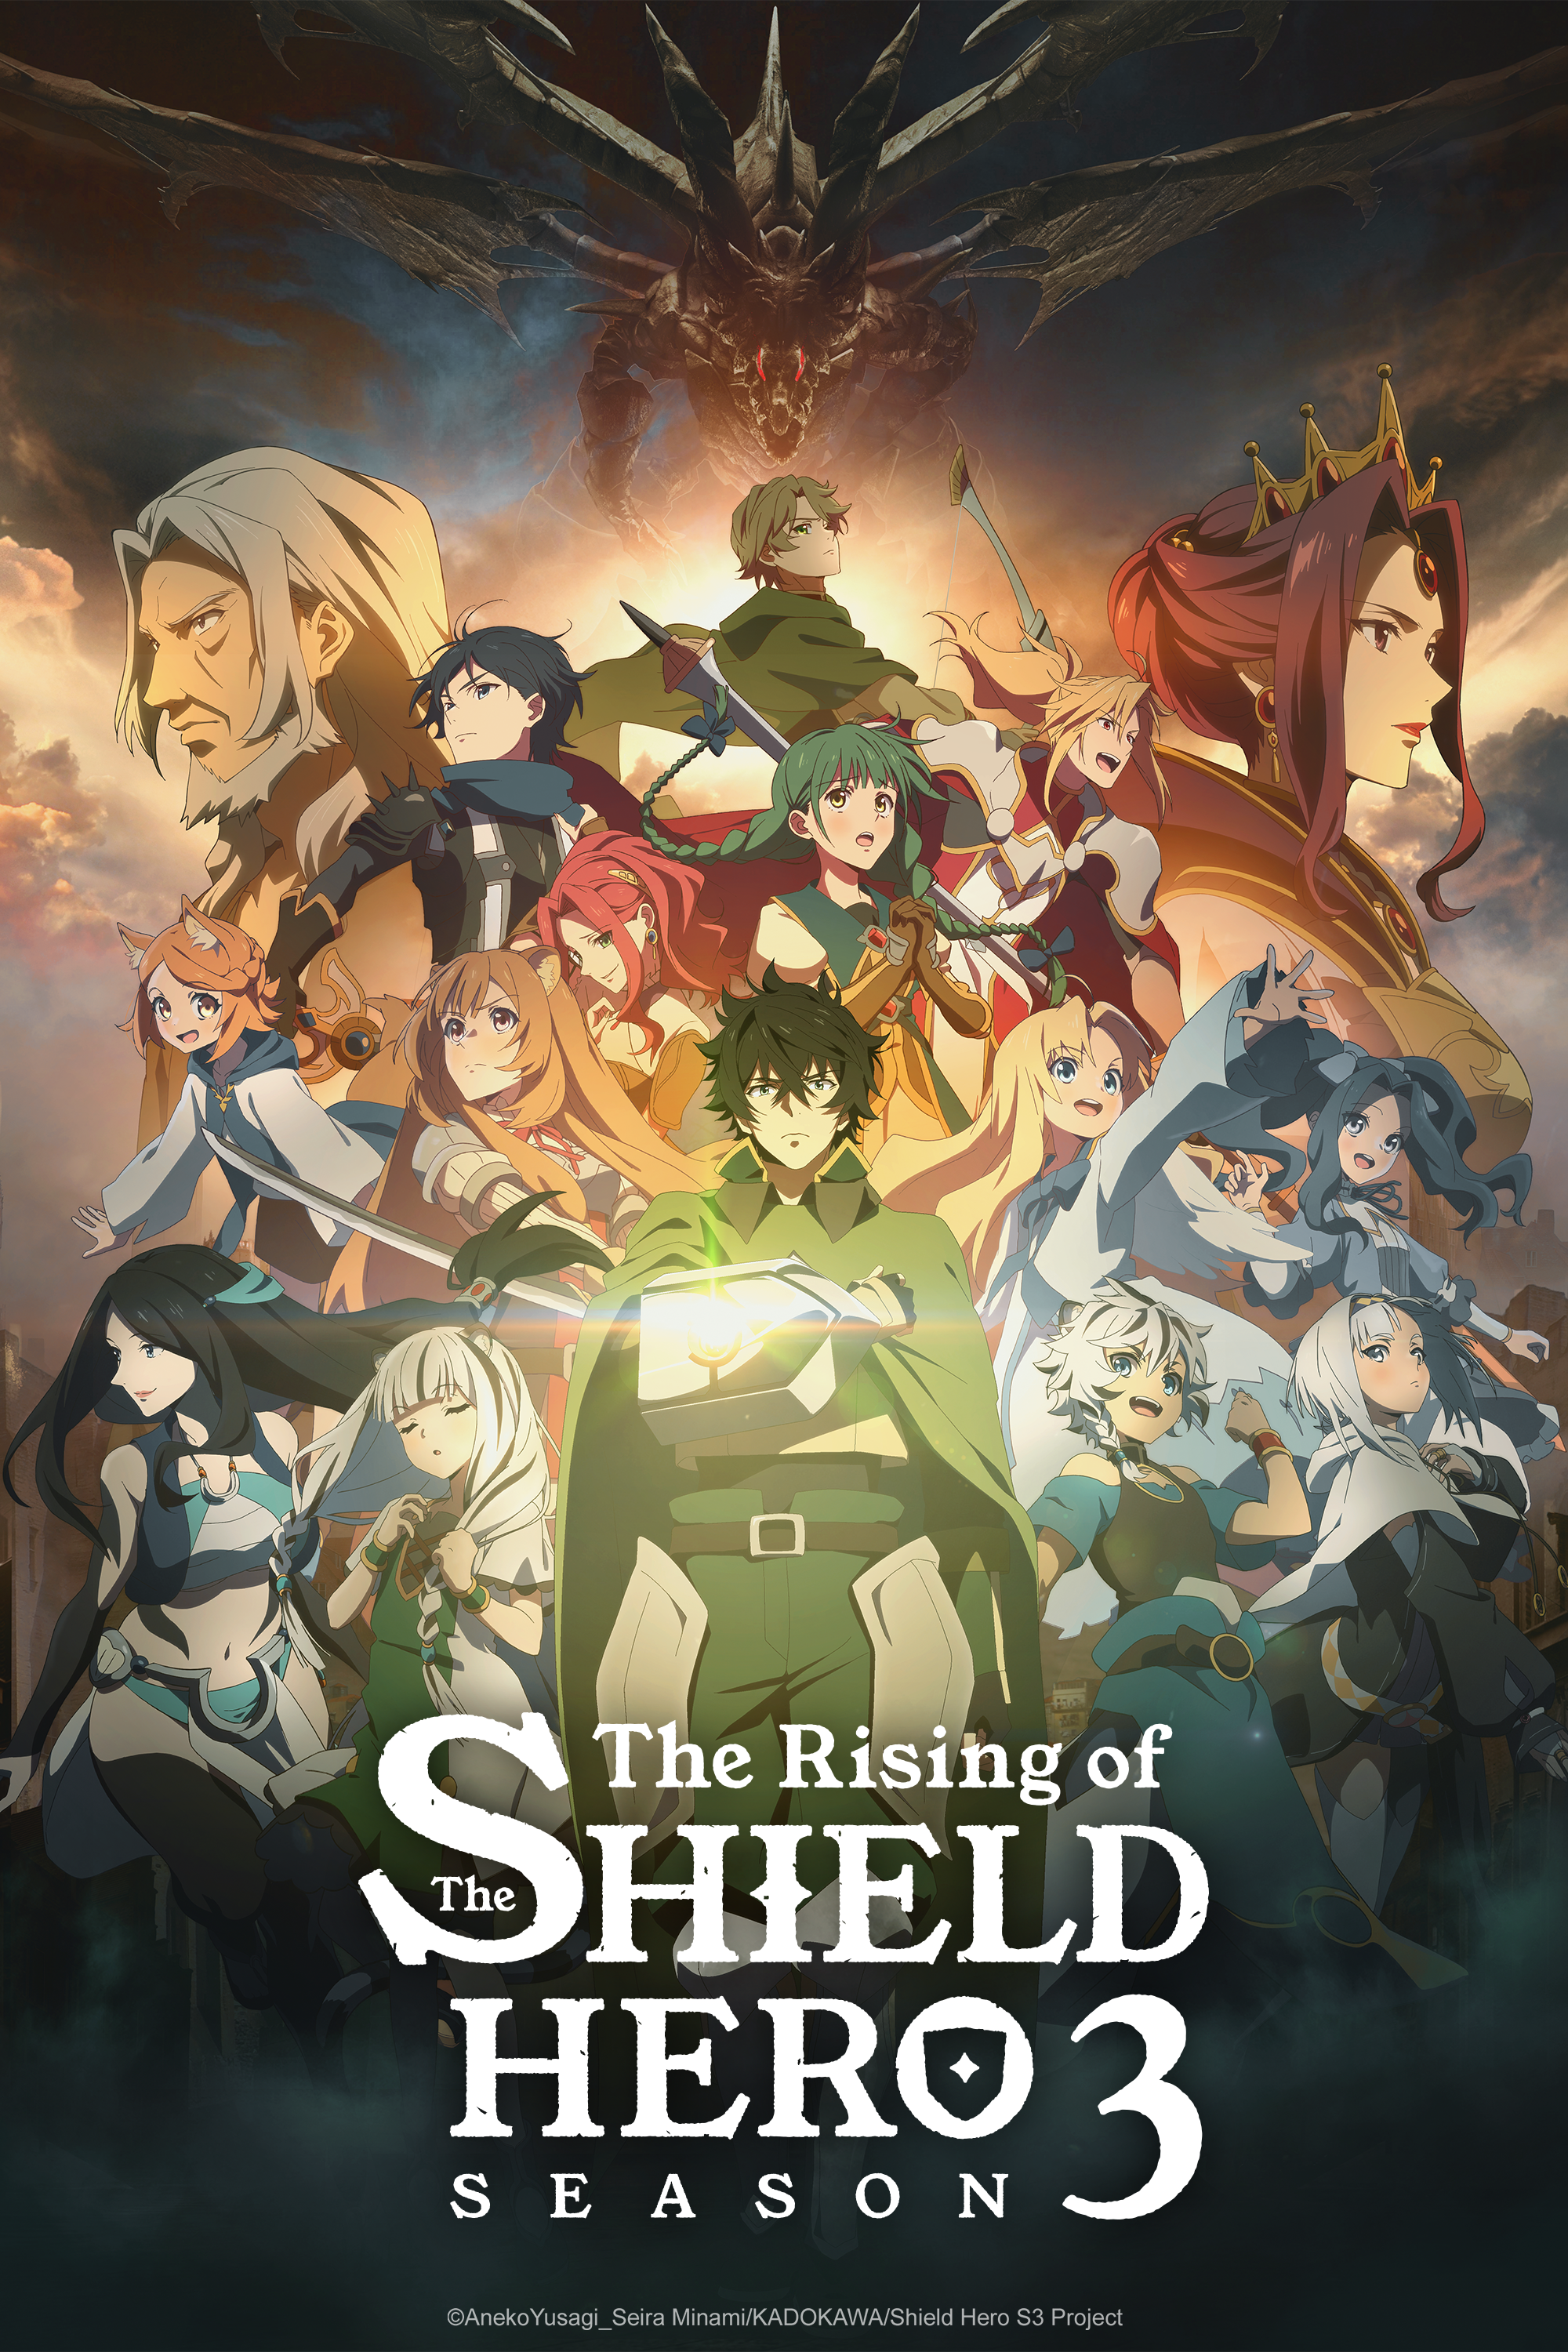 What to expect from The Rising of the Shield Hero season 4